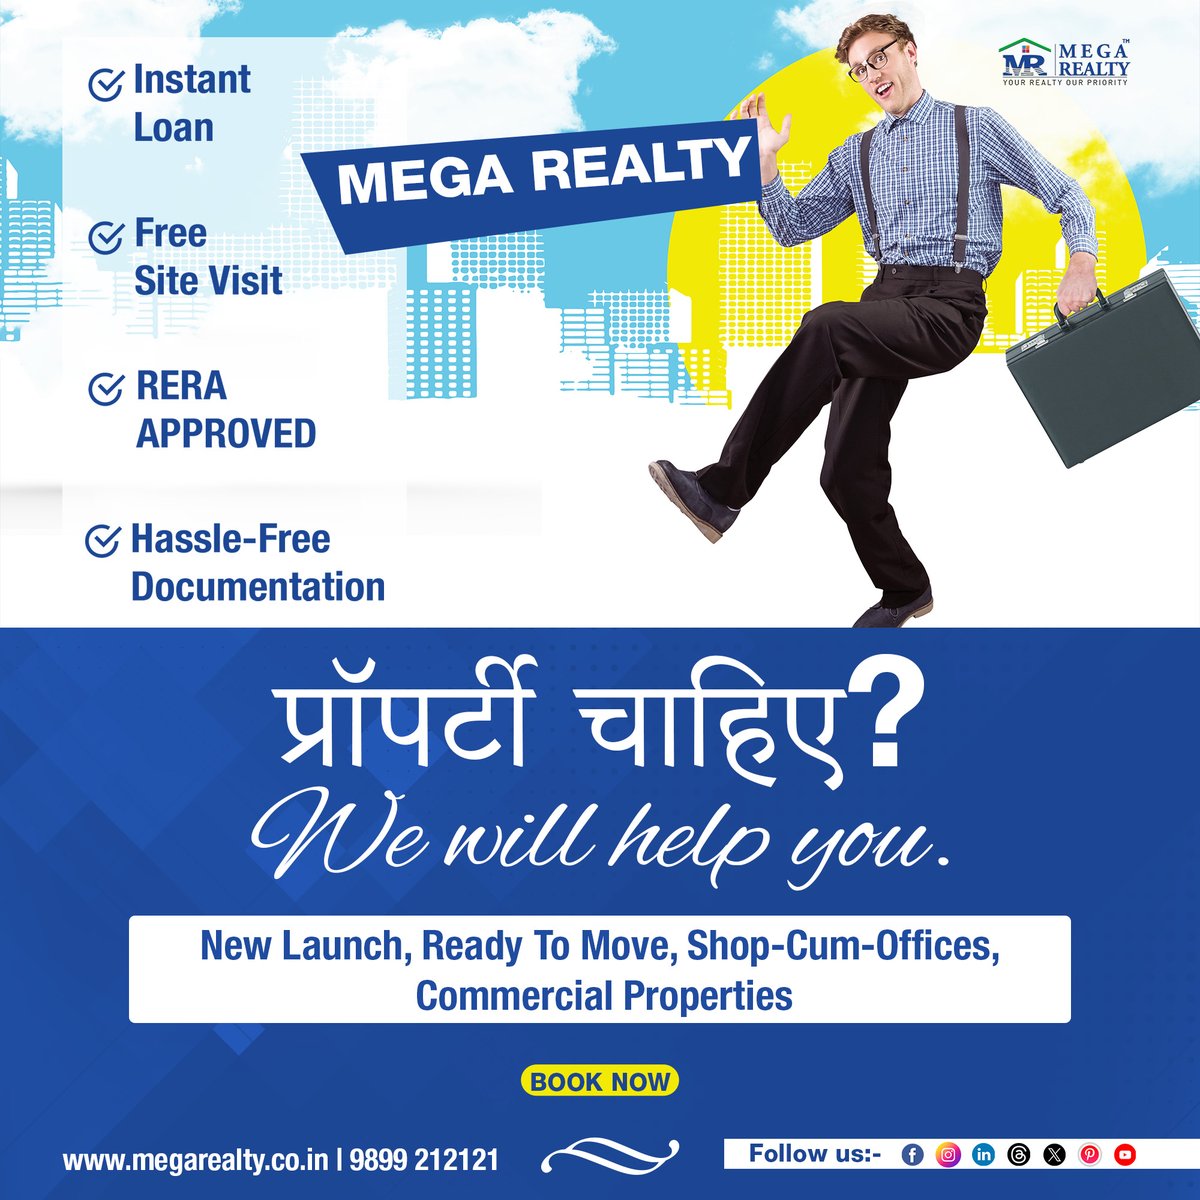 Searching for the perfect #property can be a daunting task, but we're here to make it easy! 🏠
Ready to find your dream property? 
Book your consultation now and let's get started! 🔑
📱9899 212121
#PropertyDevelopment #InvestmentStrategy
#REITs #gurgaonproperty #delhiproperty